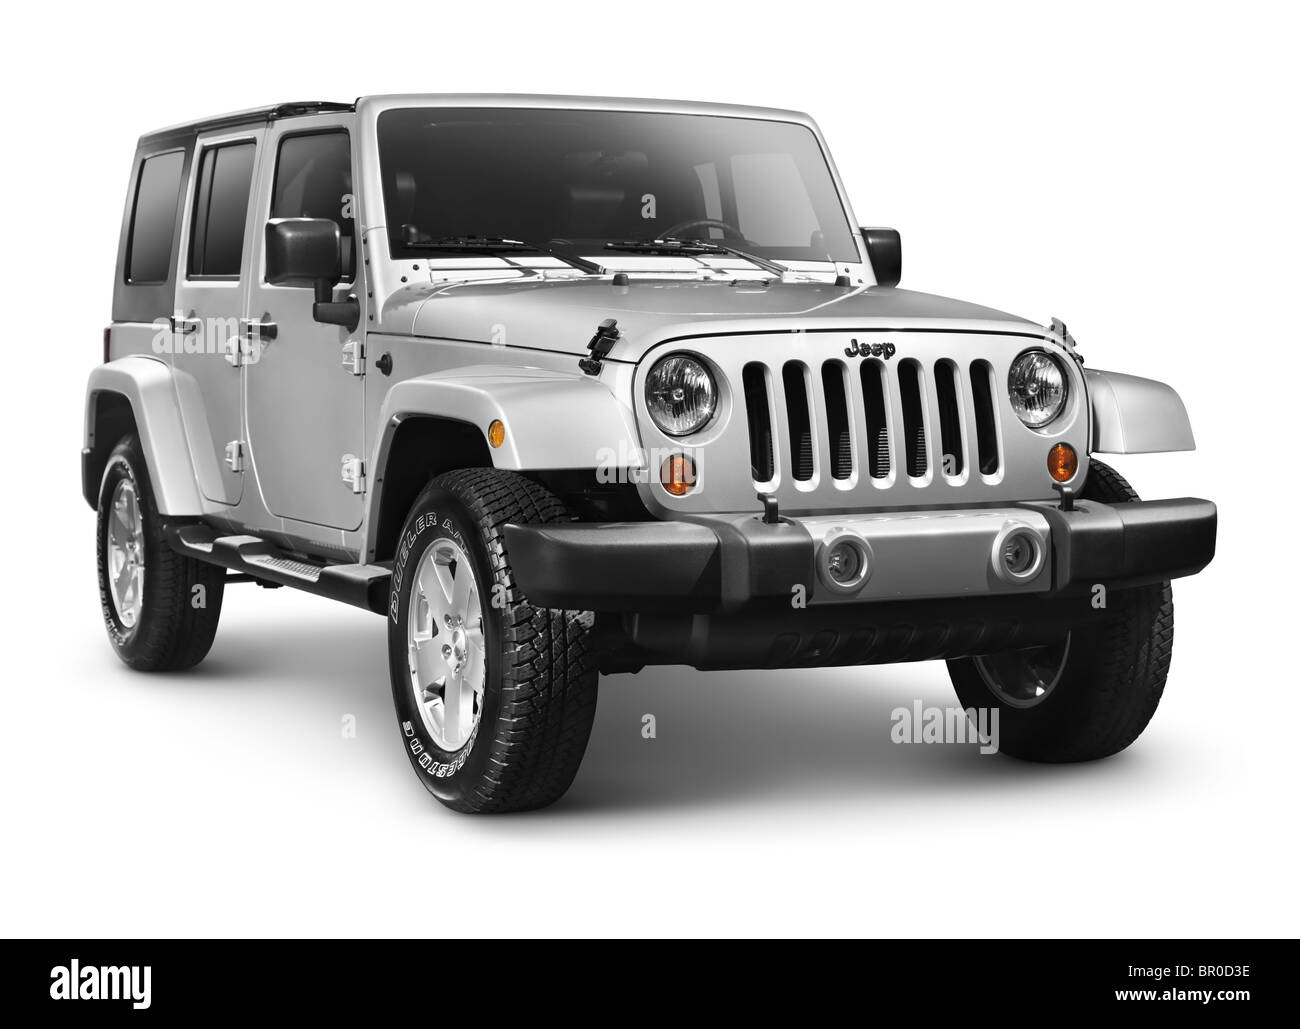 License available at MaximImages.com - Silver 2011 Jeep Wrangler Unlimited Sahara 4x4 SUV isolated on white background with clipping path Stock Photo